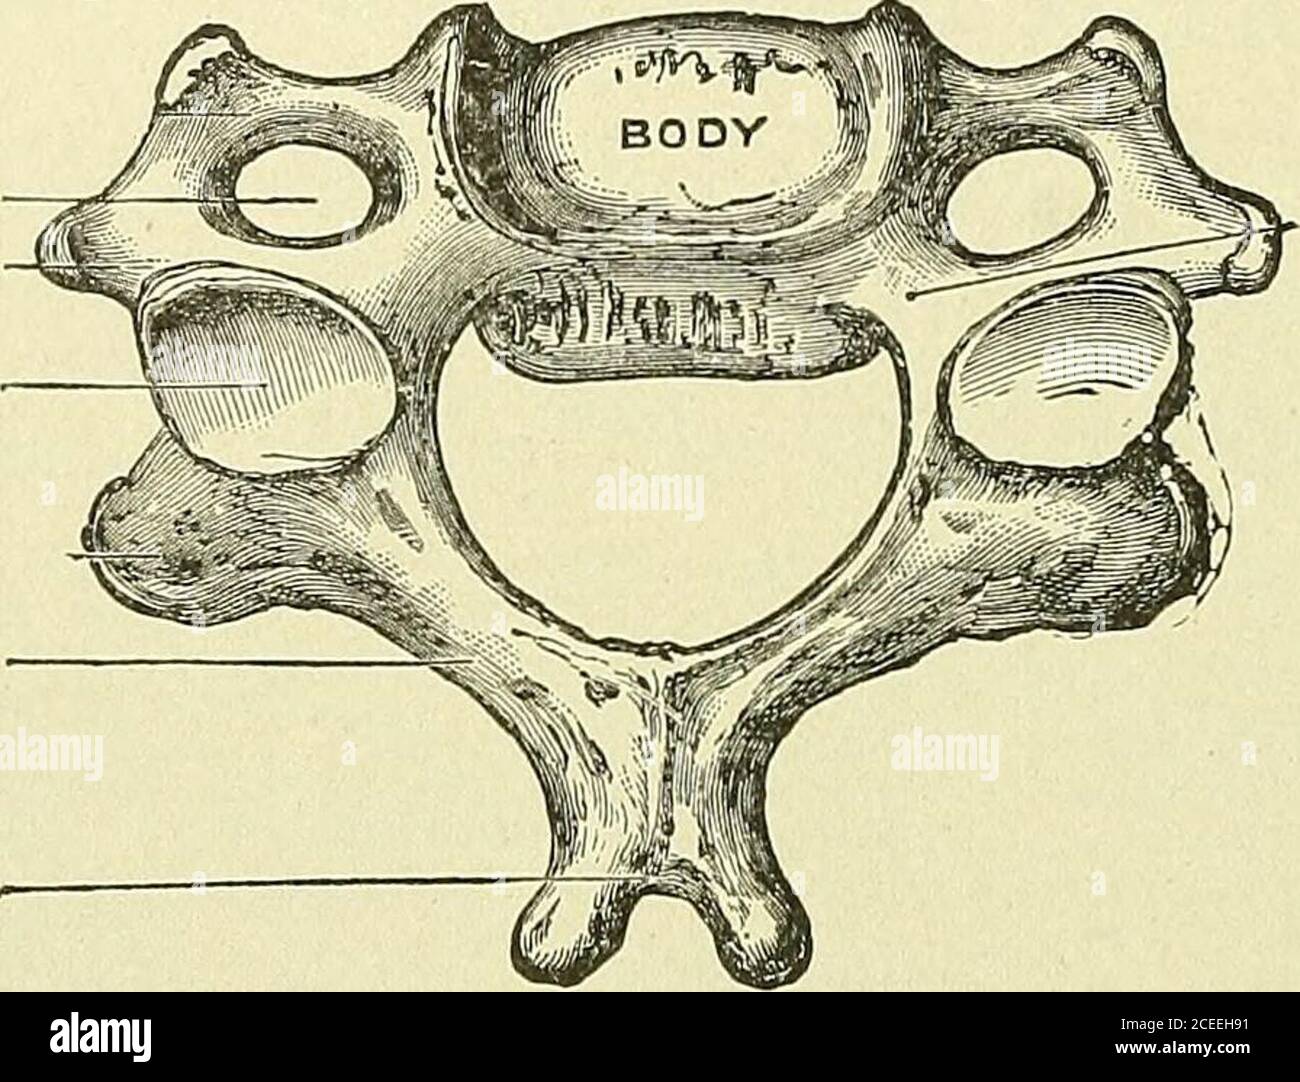 . Text-book of anatomy and physiology for nurses. Fig. 30.—VertebralColumn, Lateral Aspect. 1-7, Cervical vertebrae;8-19, dorsal vertebrae; 20-24, lumbar vertebrae; A, A,spinous processes; B, B,articular facets of trans-verse processes of first tendorsal vertebrae; C, auricu-lar surface of sacrum; D,I), foramina in transverseprocesses of cervical verte-brae.— (Goulds Illus. Dic-tionary.) 36 anatomy and physiology for nurses. Points of Special Interest, The cervical vertebras present a foramen at the base of the transverseprocess, the transverse foramen, through which an artery runs to the brai Stock Photo